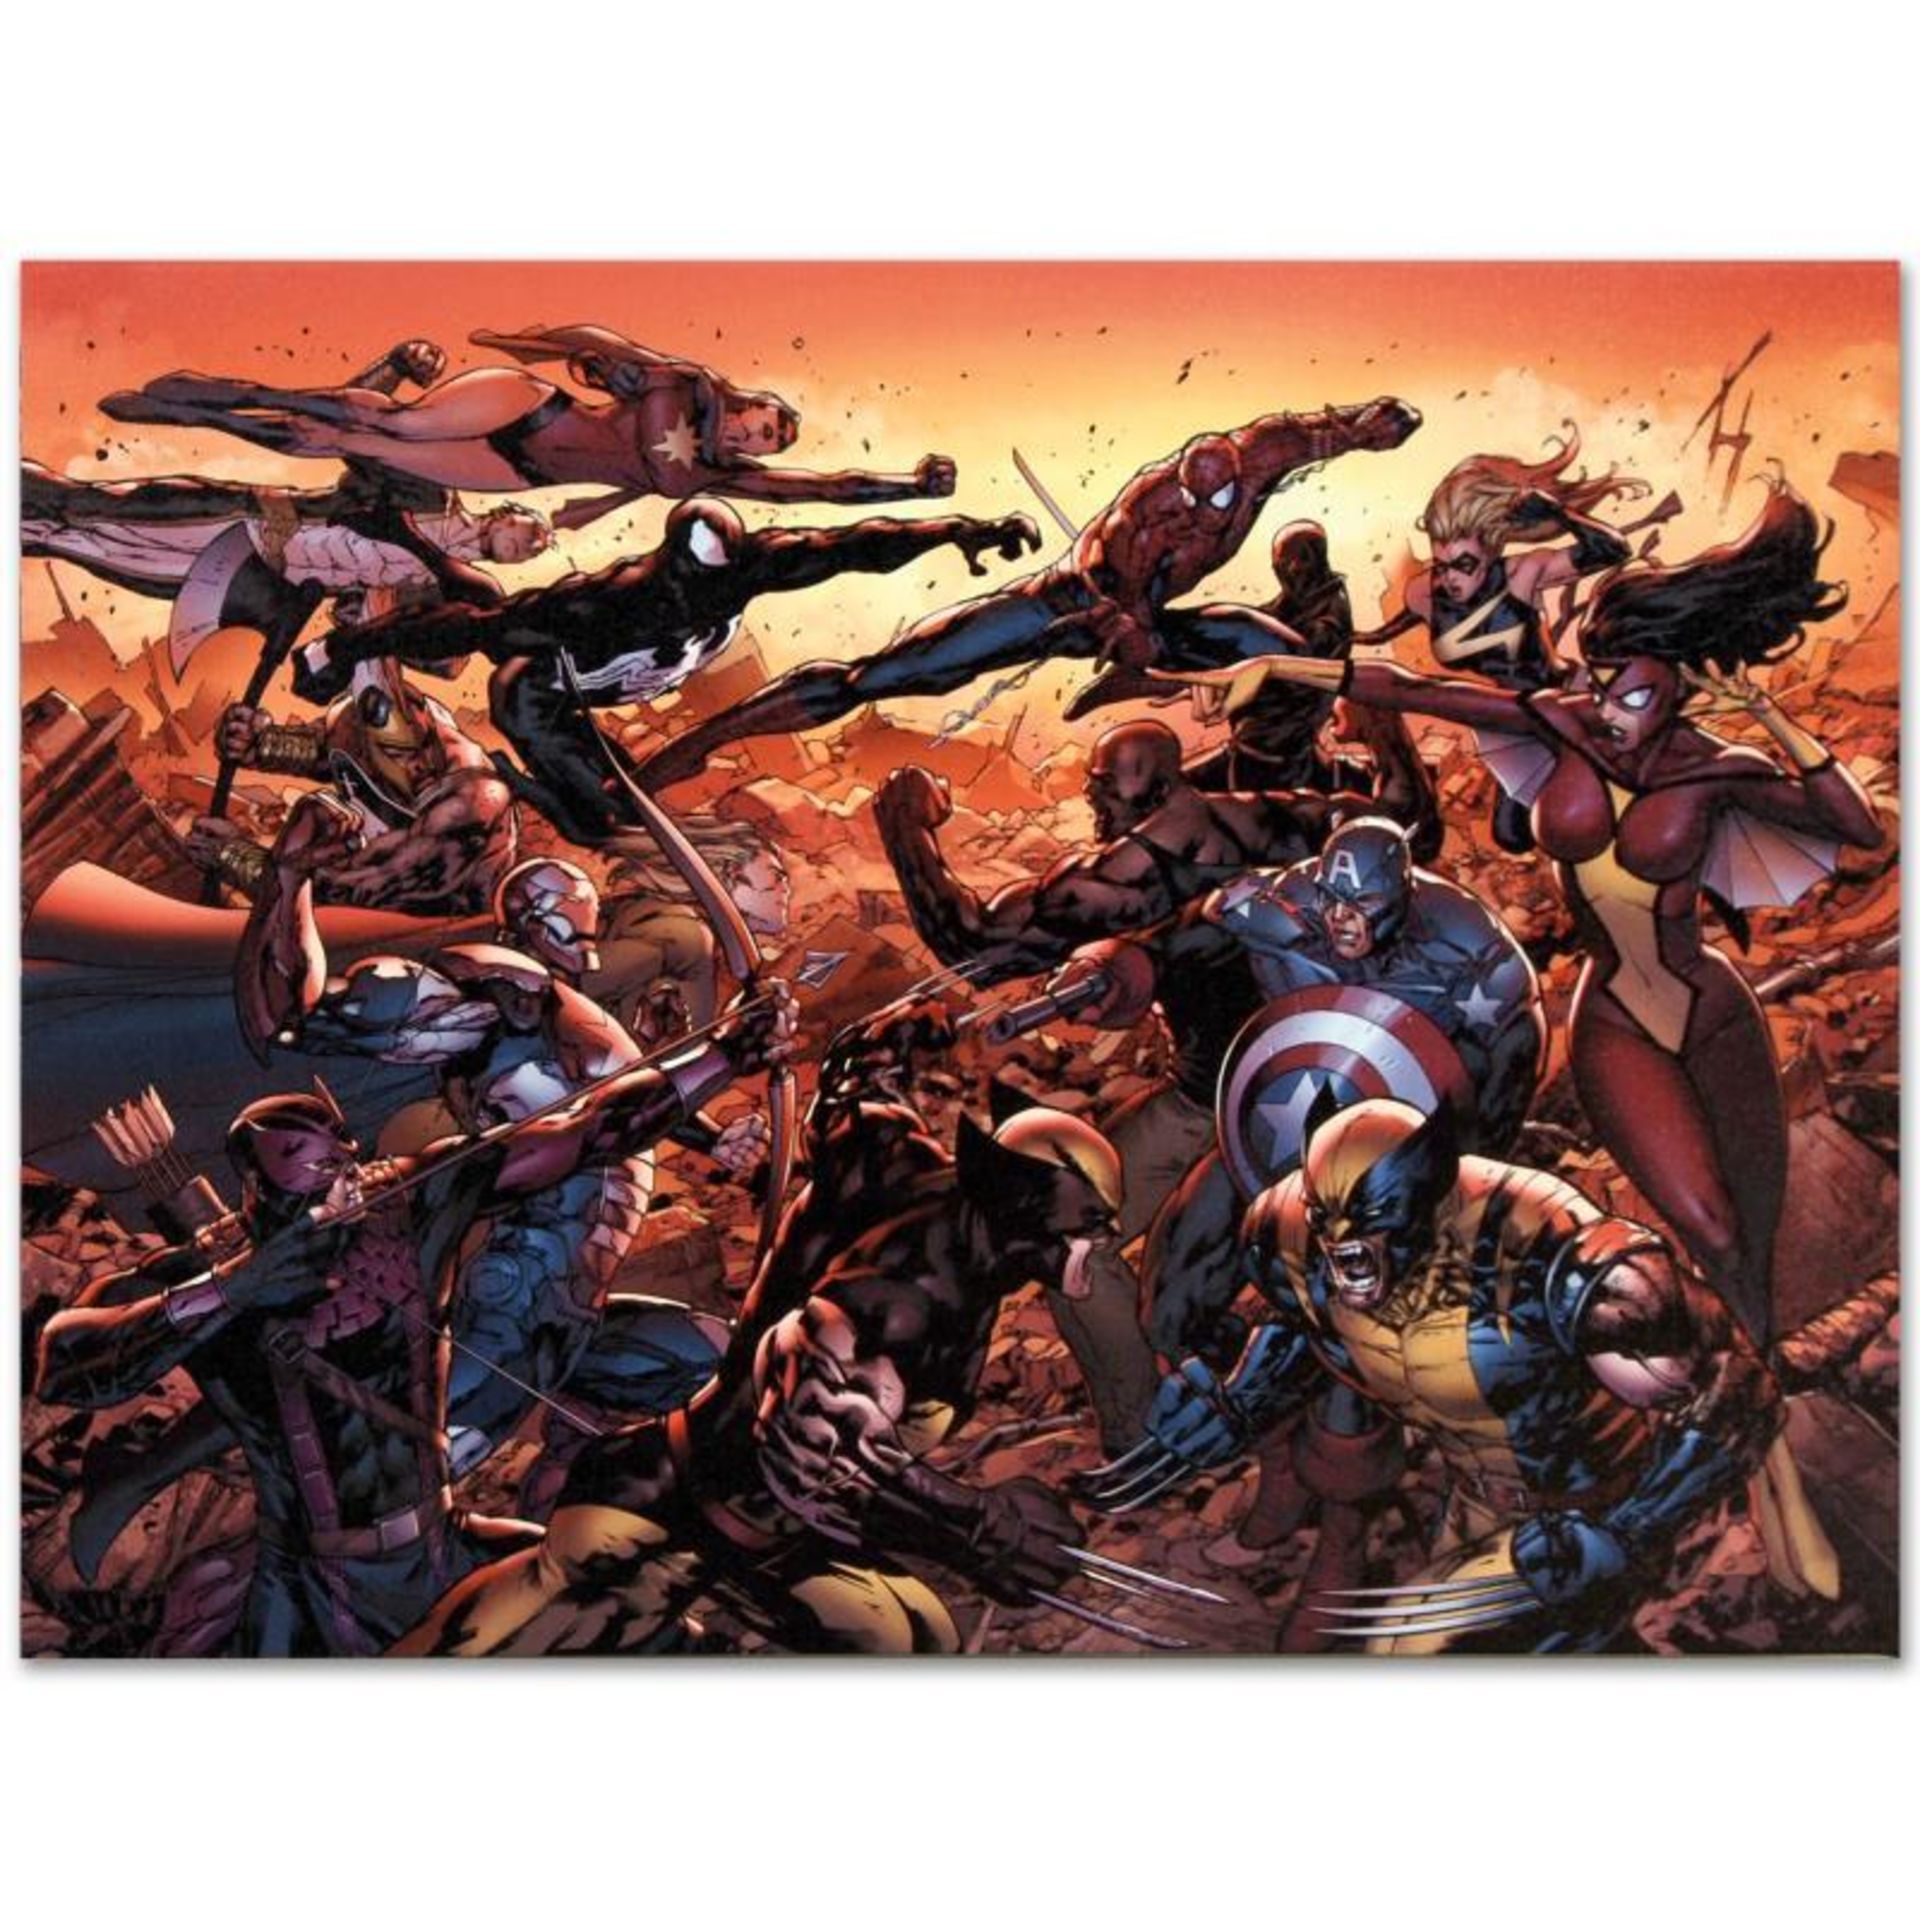 Marvel Comics "New Avengers #50" Numbered Limited Edition Giclee on Canvas by Bi